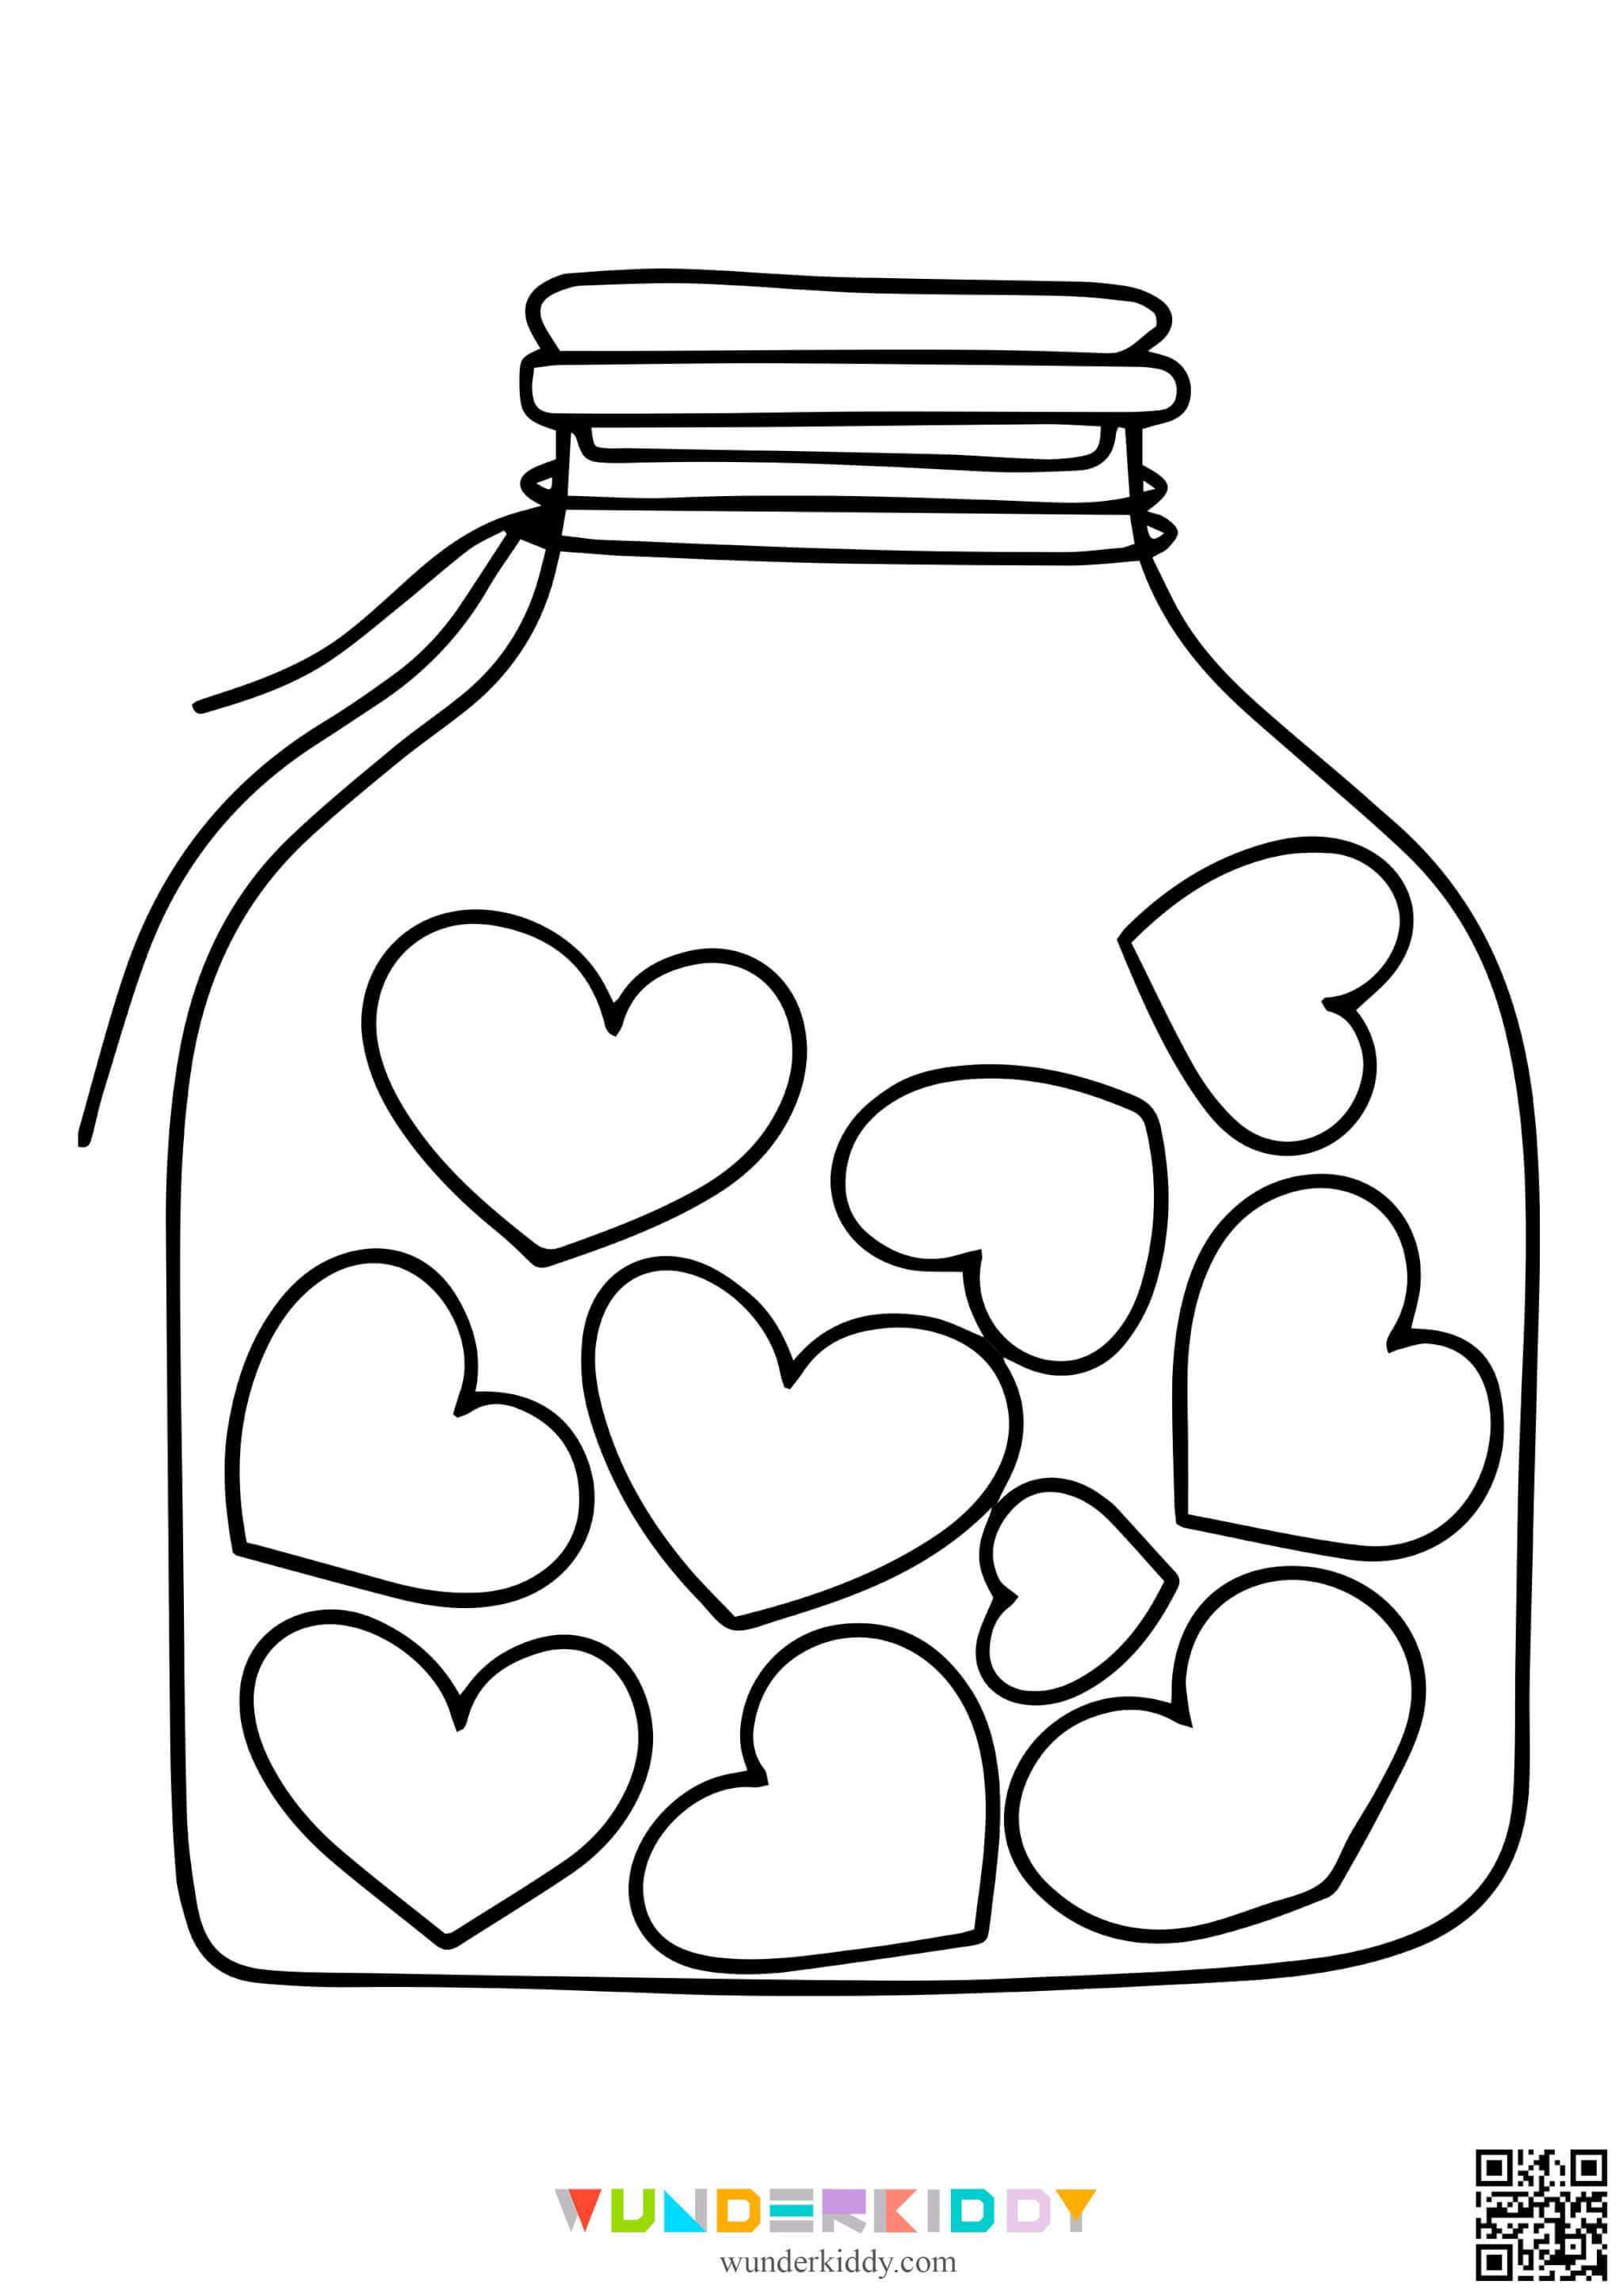 Valentines Coloring Pages - Image 11